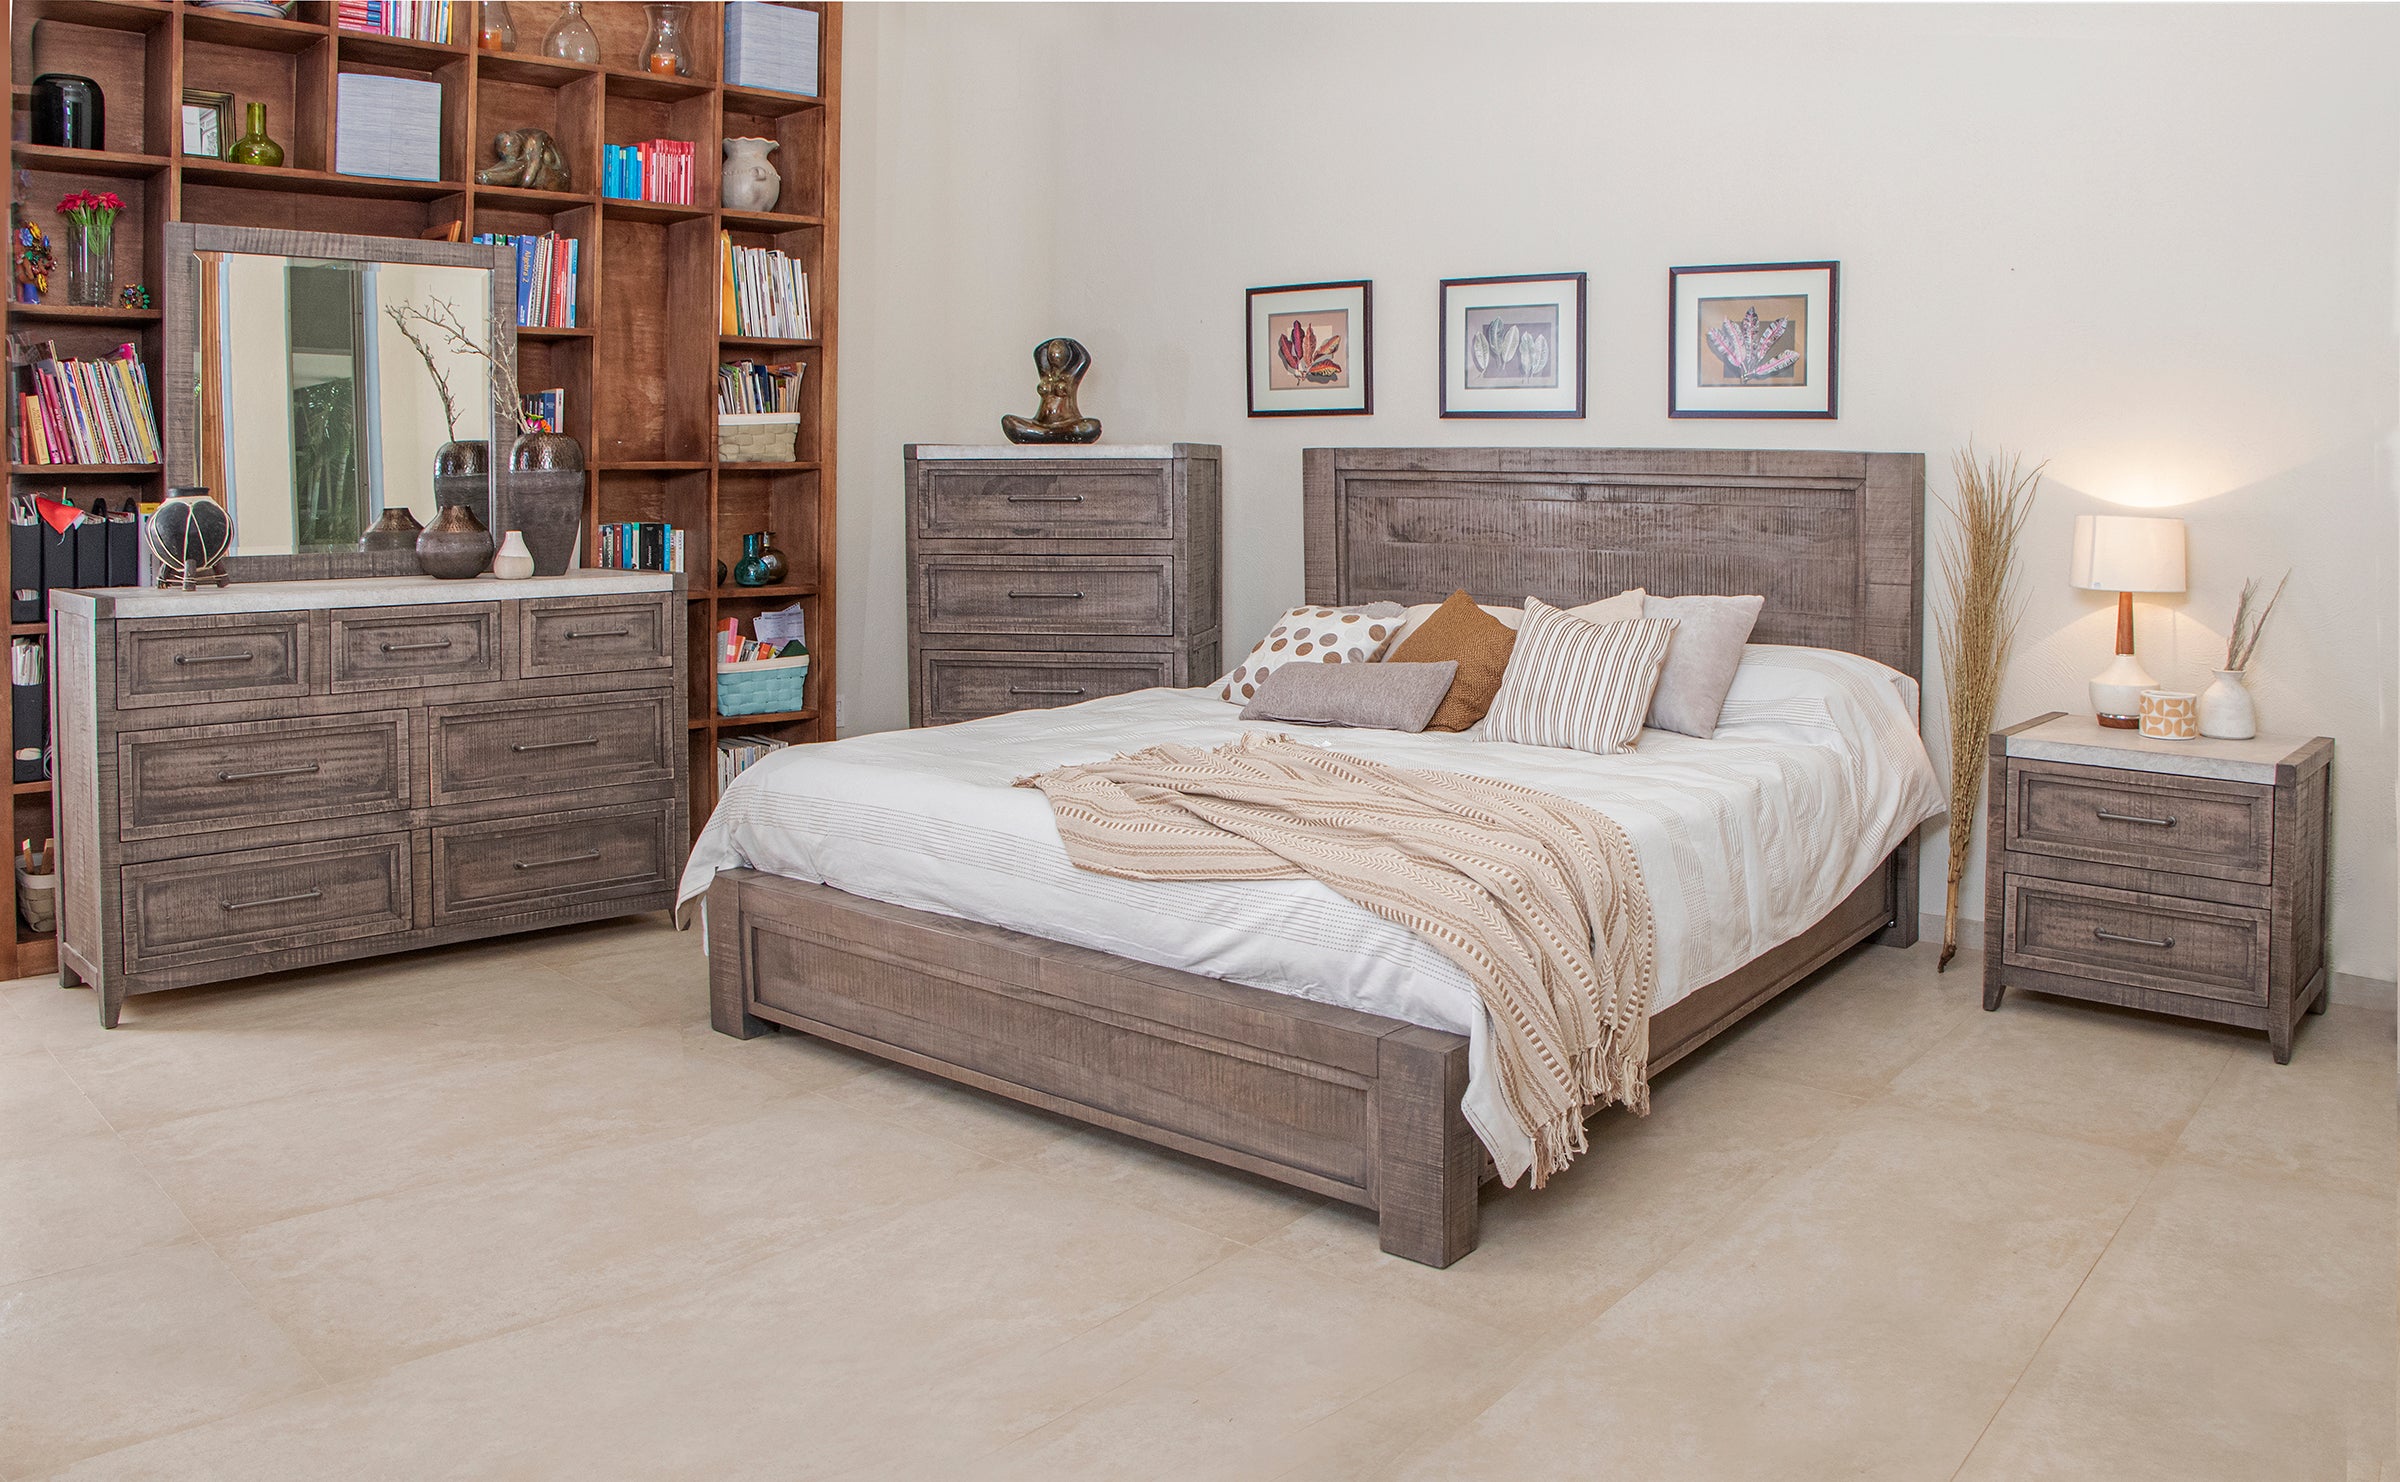 MARBLE BEDROOM COLLECTION Model: IFD6391BEDROOM SOLID WOOD